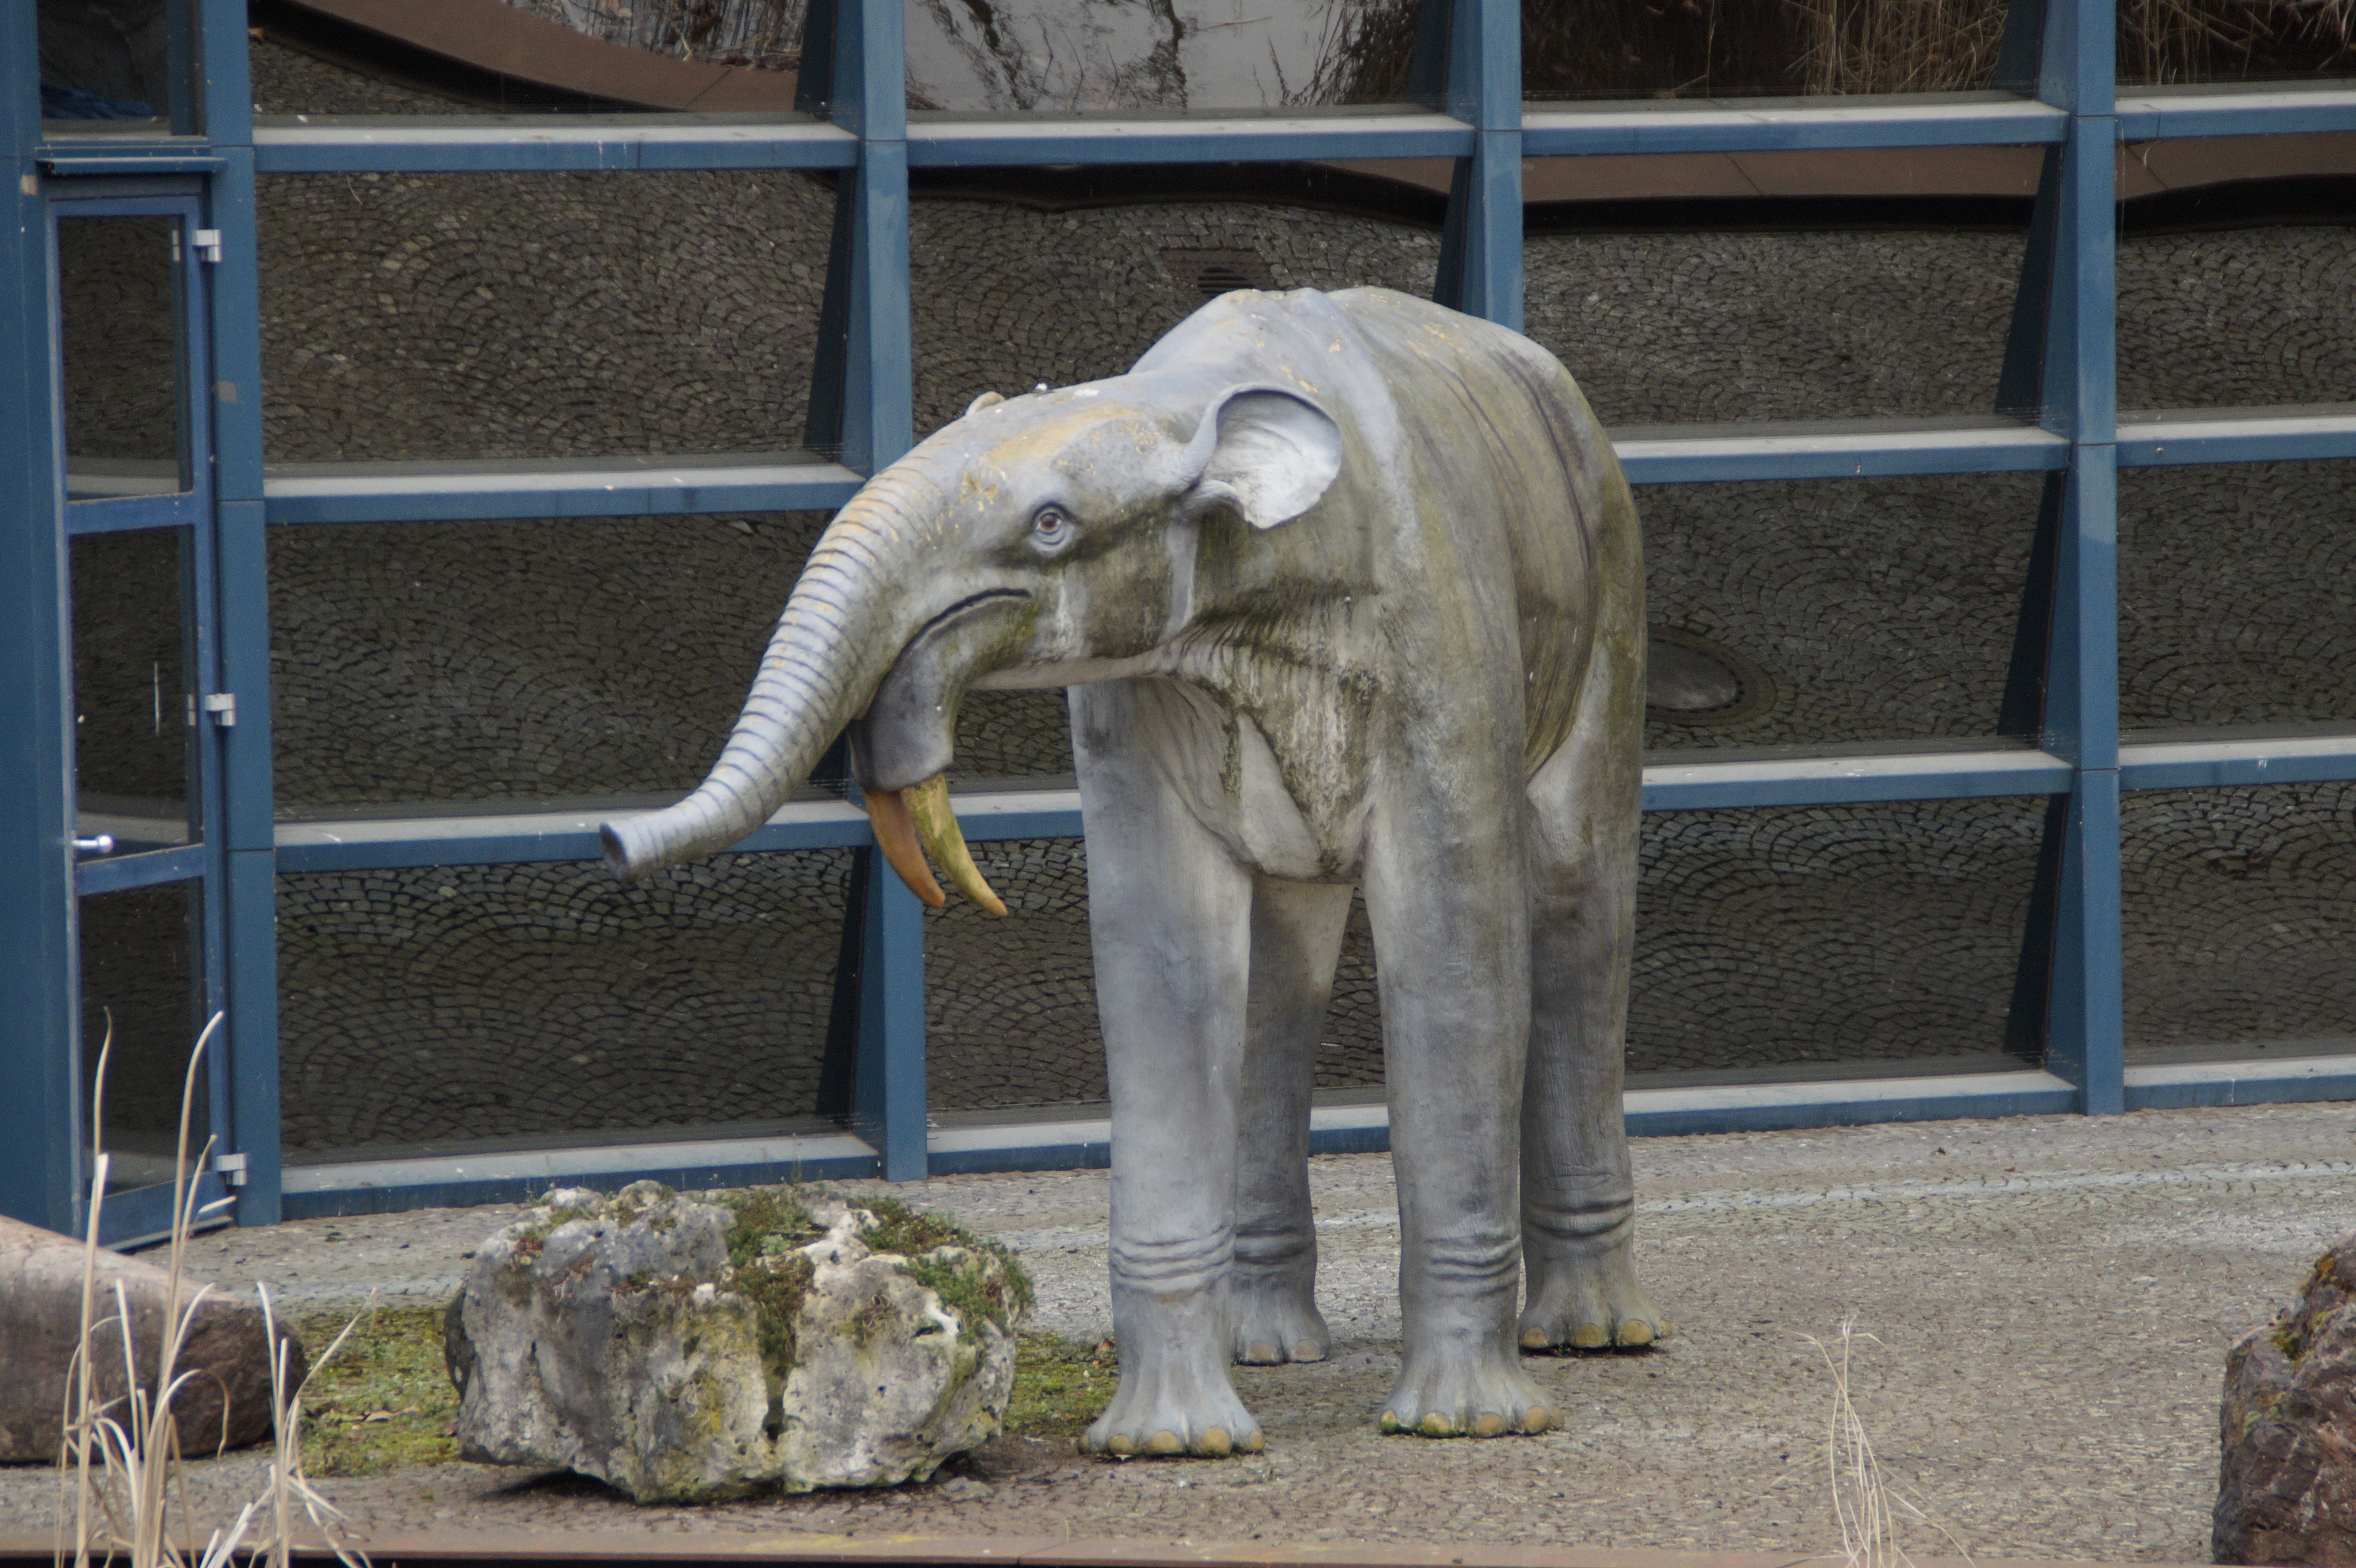 white and gray elephant statue